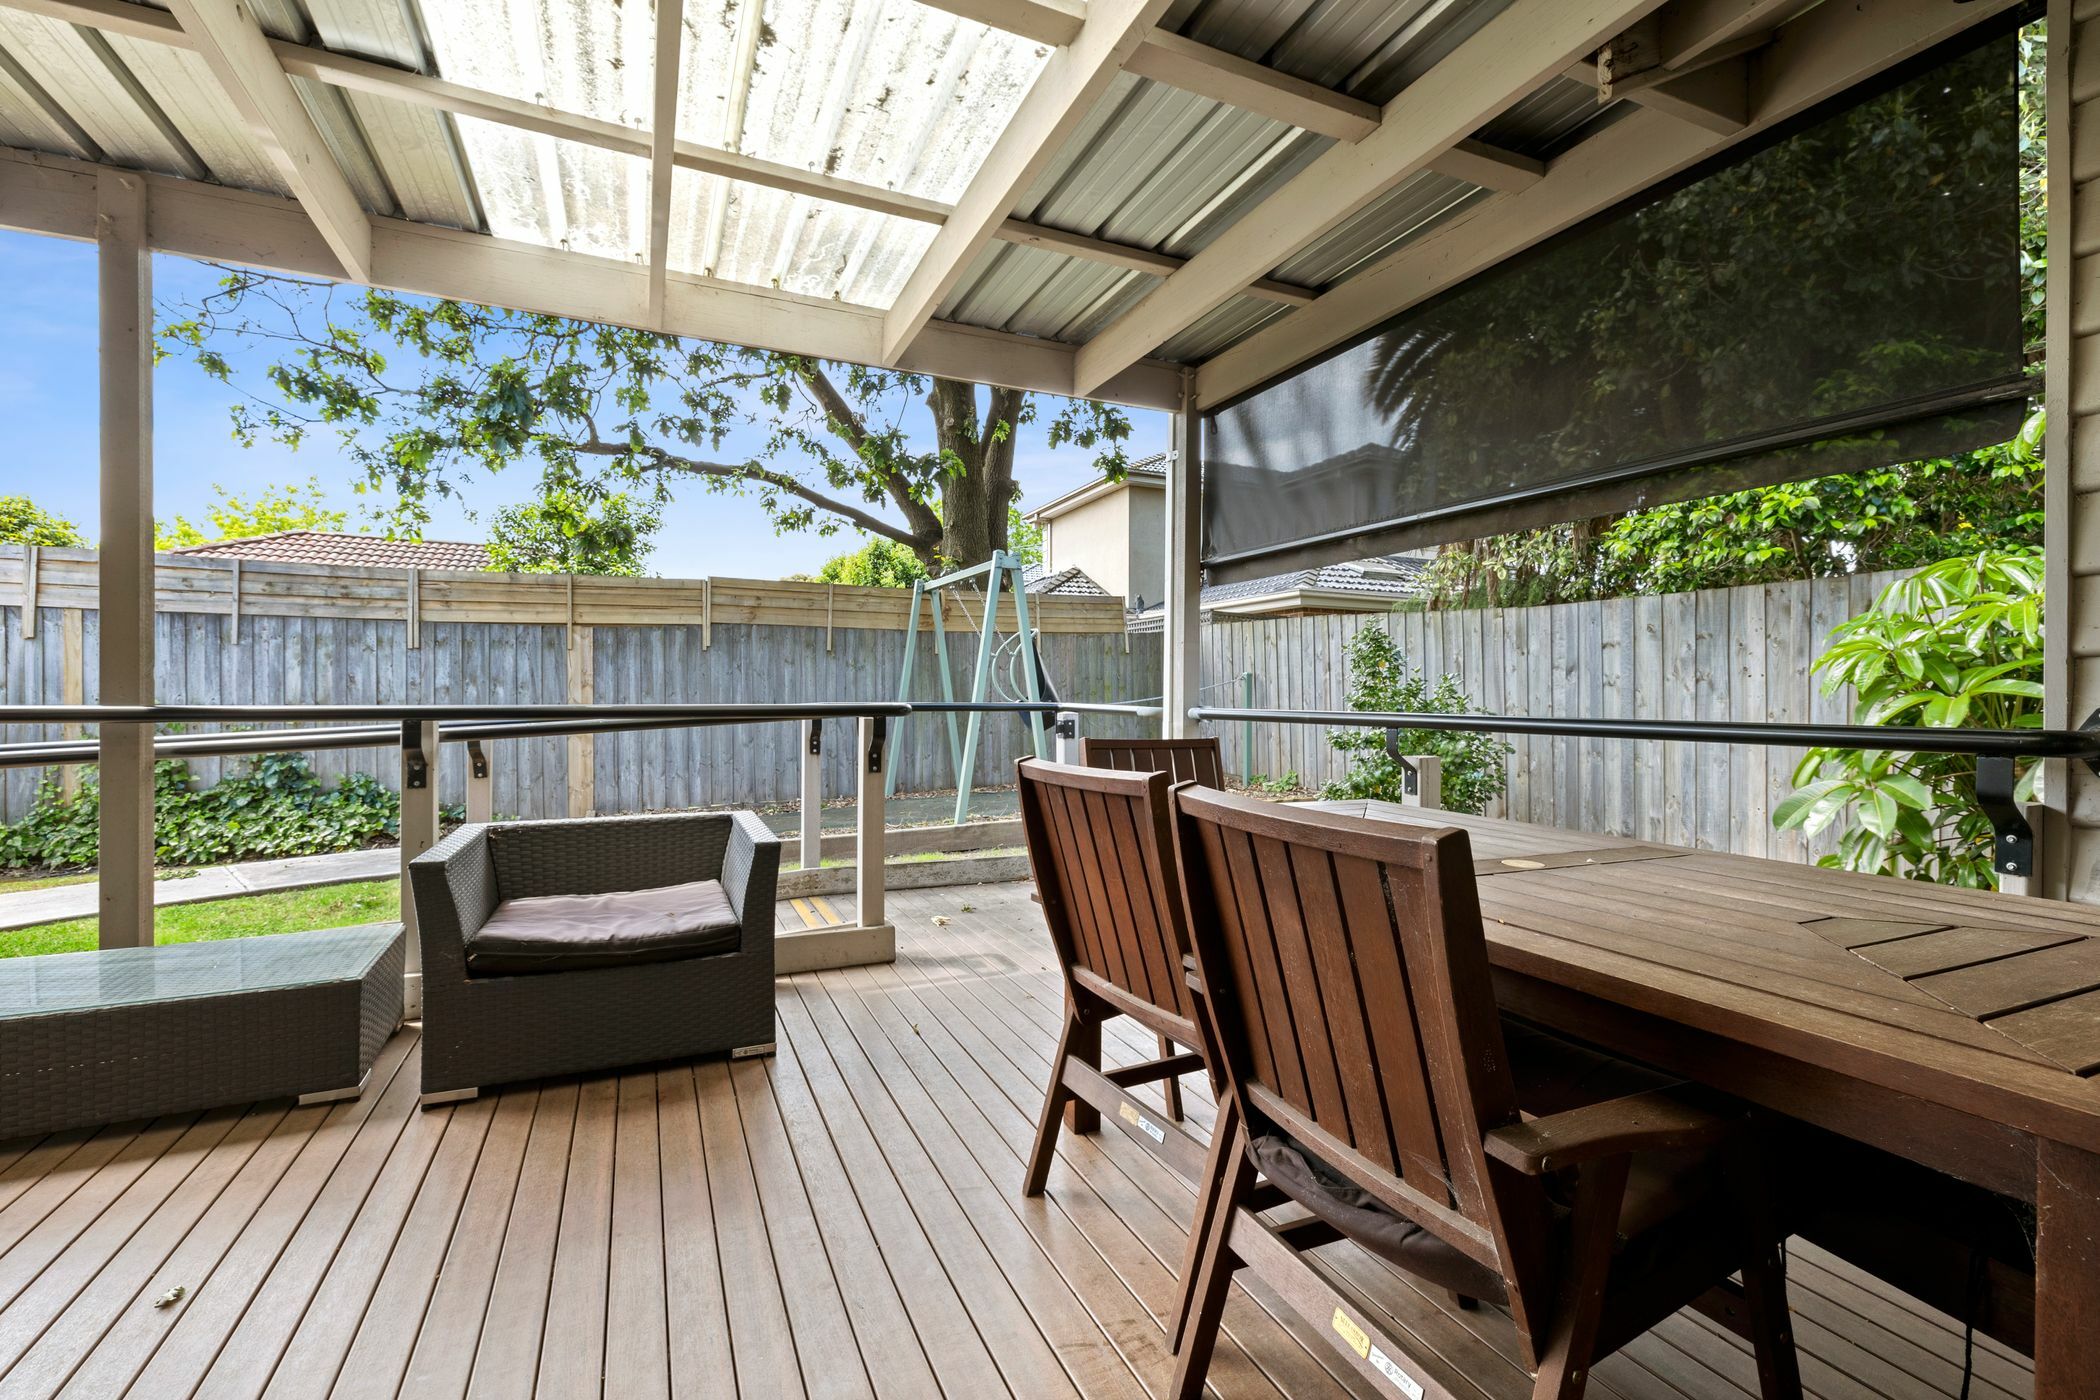 Undercover decking area with table and chairs